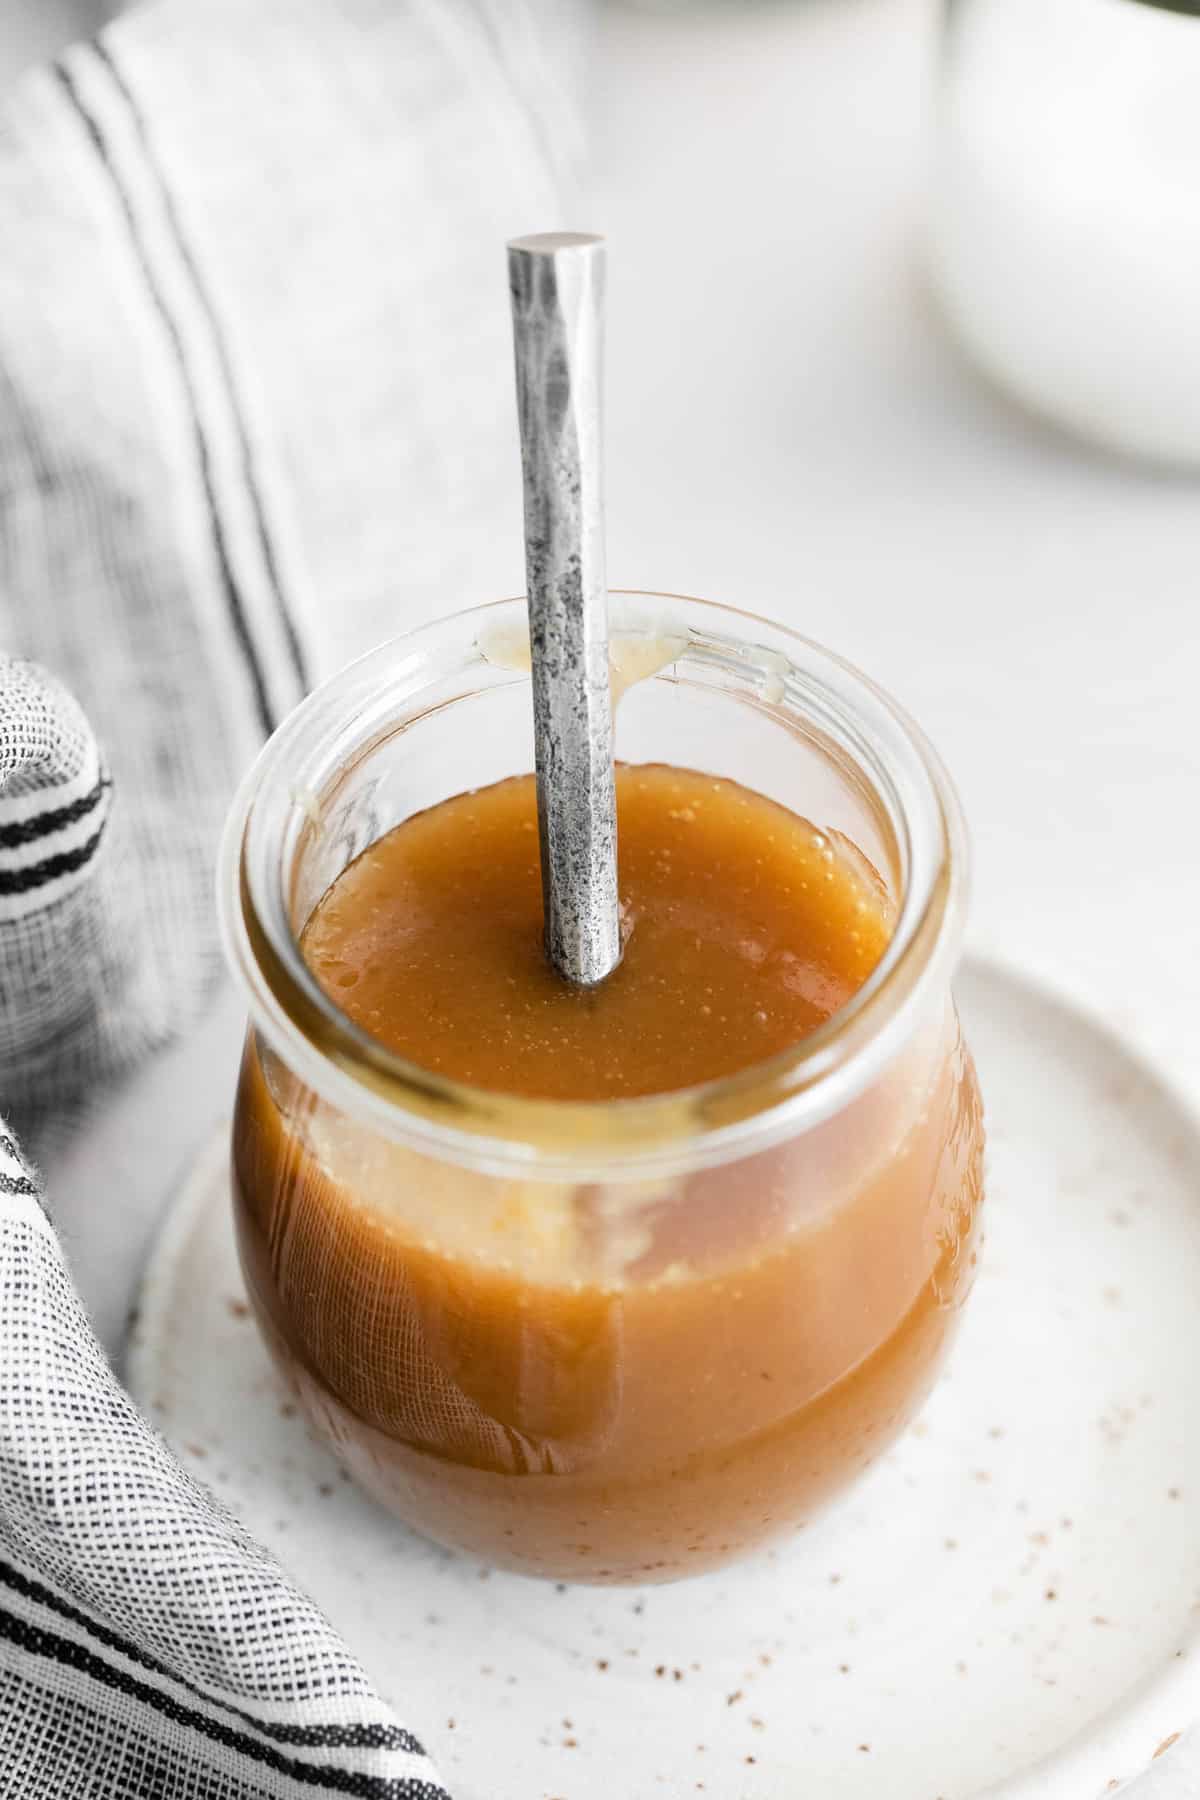 Caramel in a small glass jar with a silver spoon.